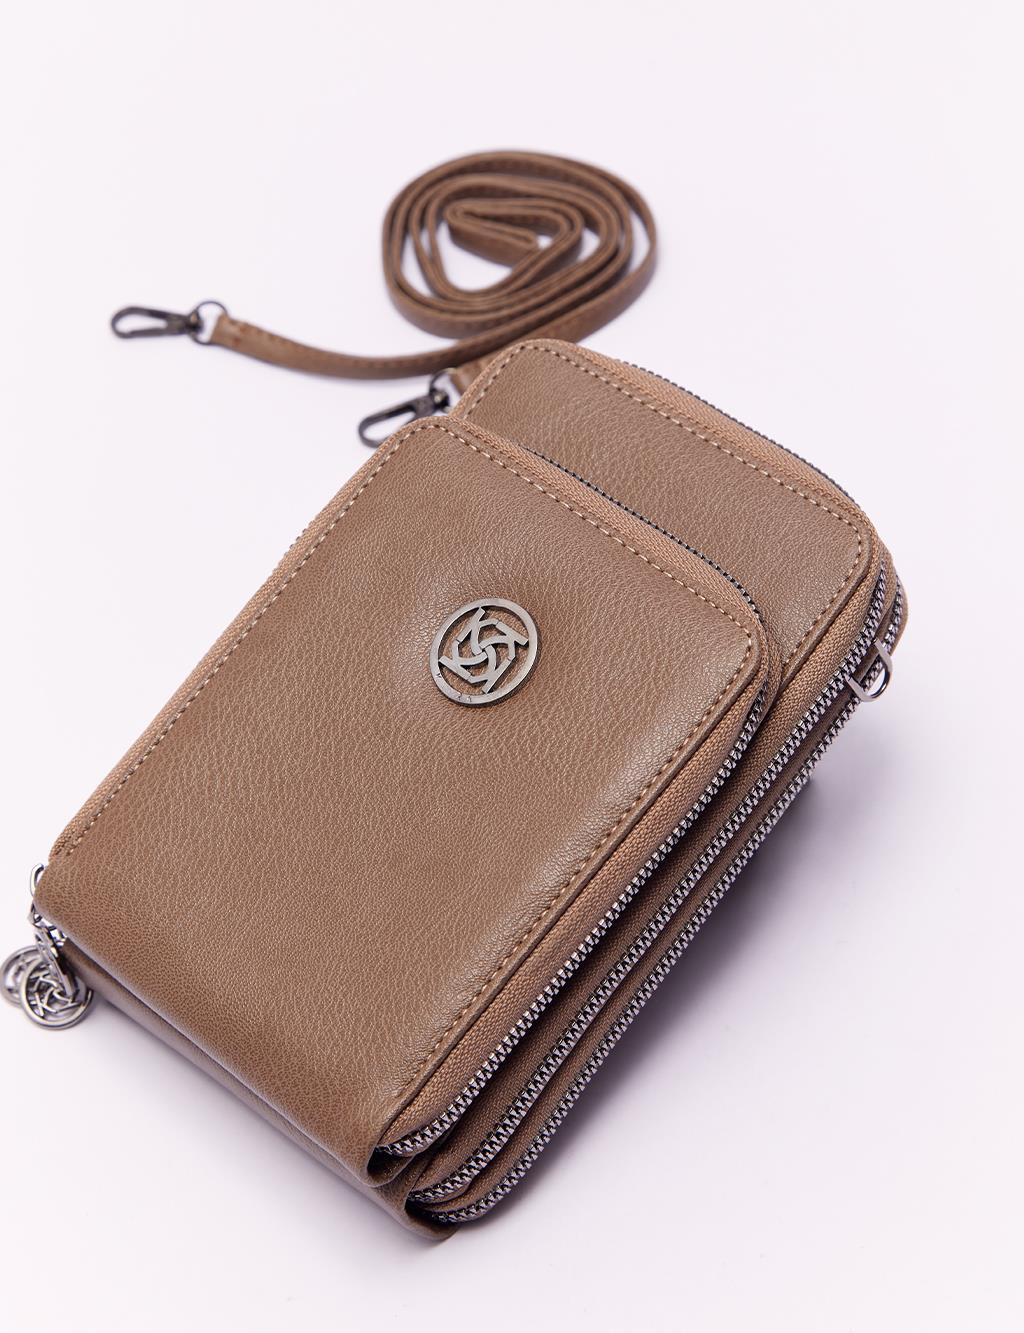 Three Compartment Natural Leather Wallet Bag Mink